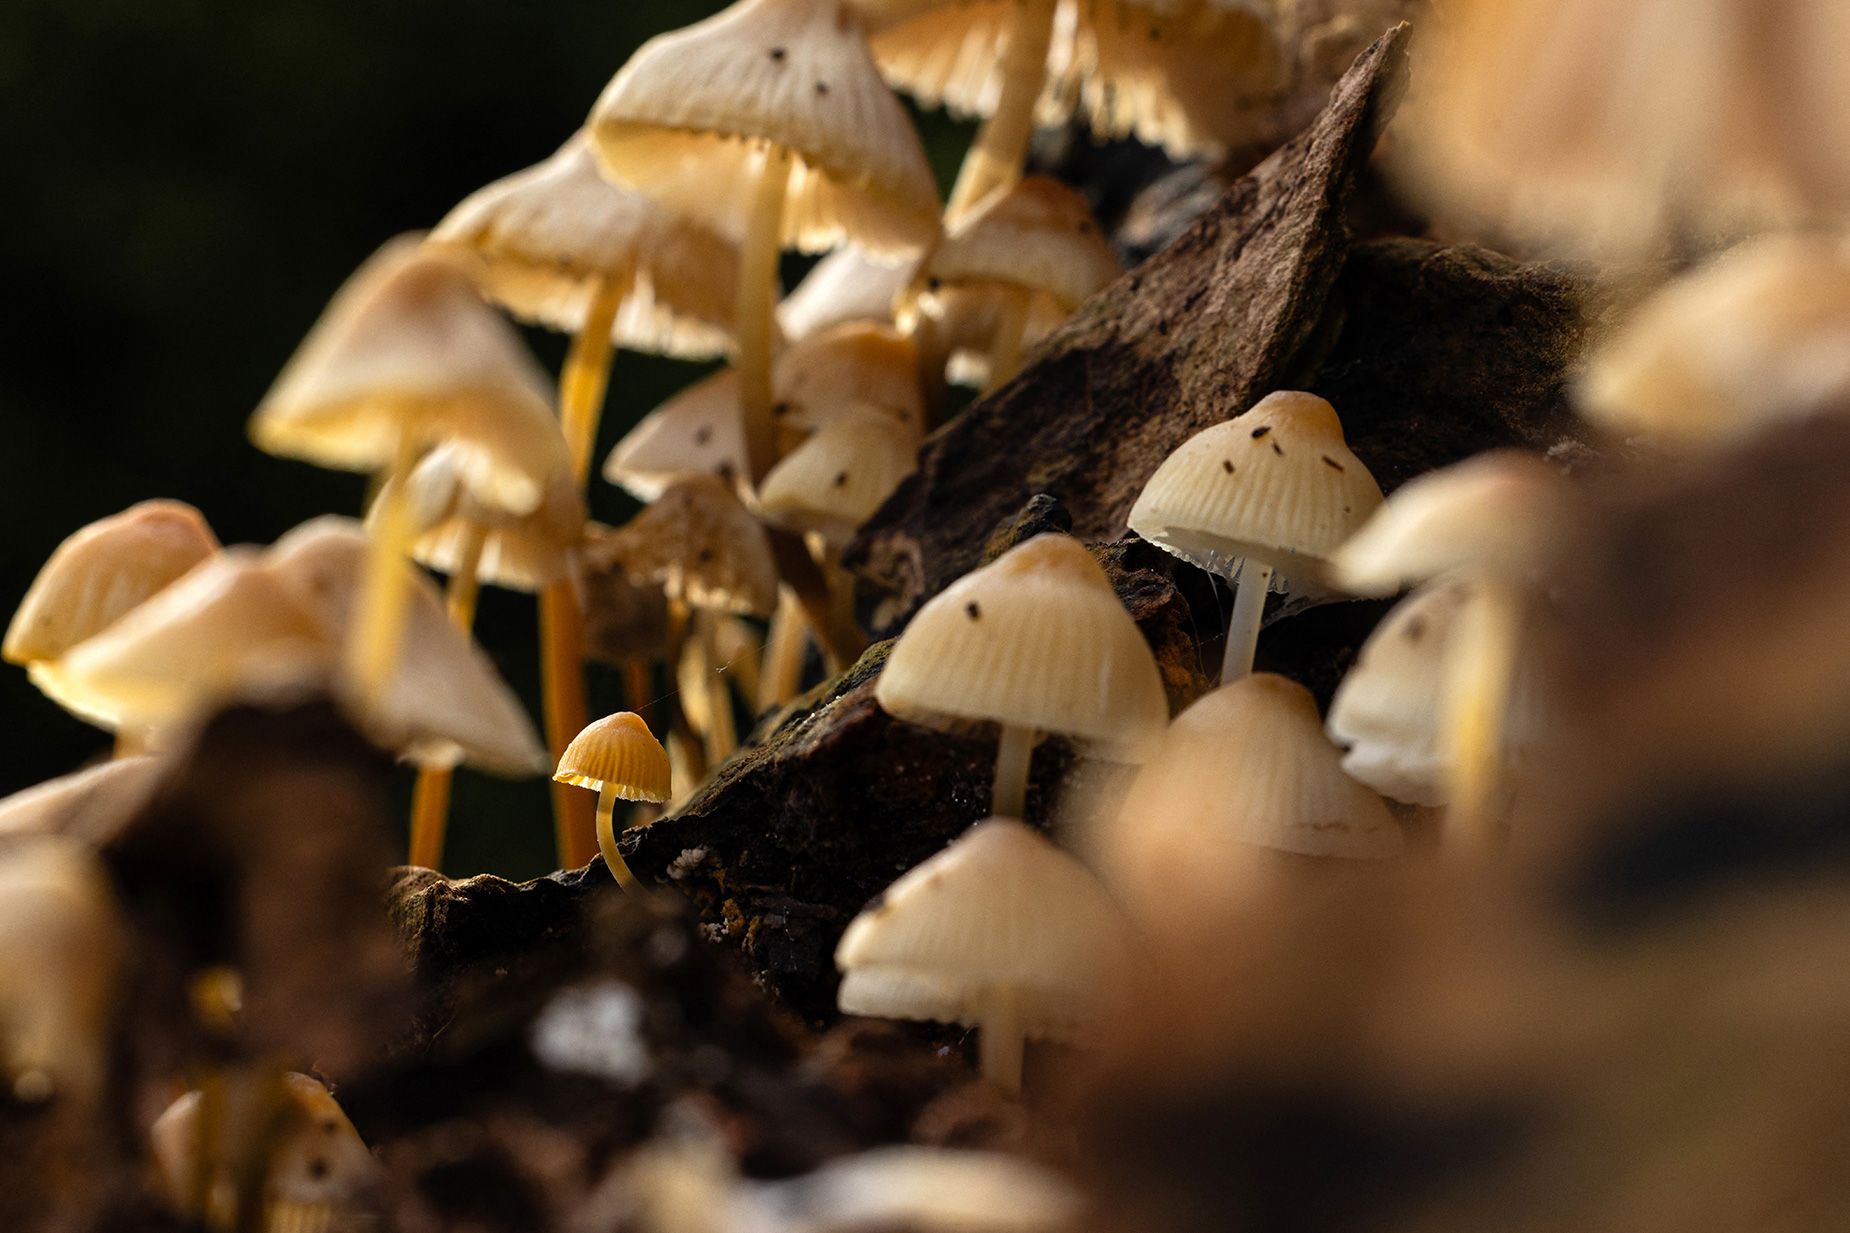 Mystery of common mushroom growing from an amphibian shows how little we know about fungi - Education - News